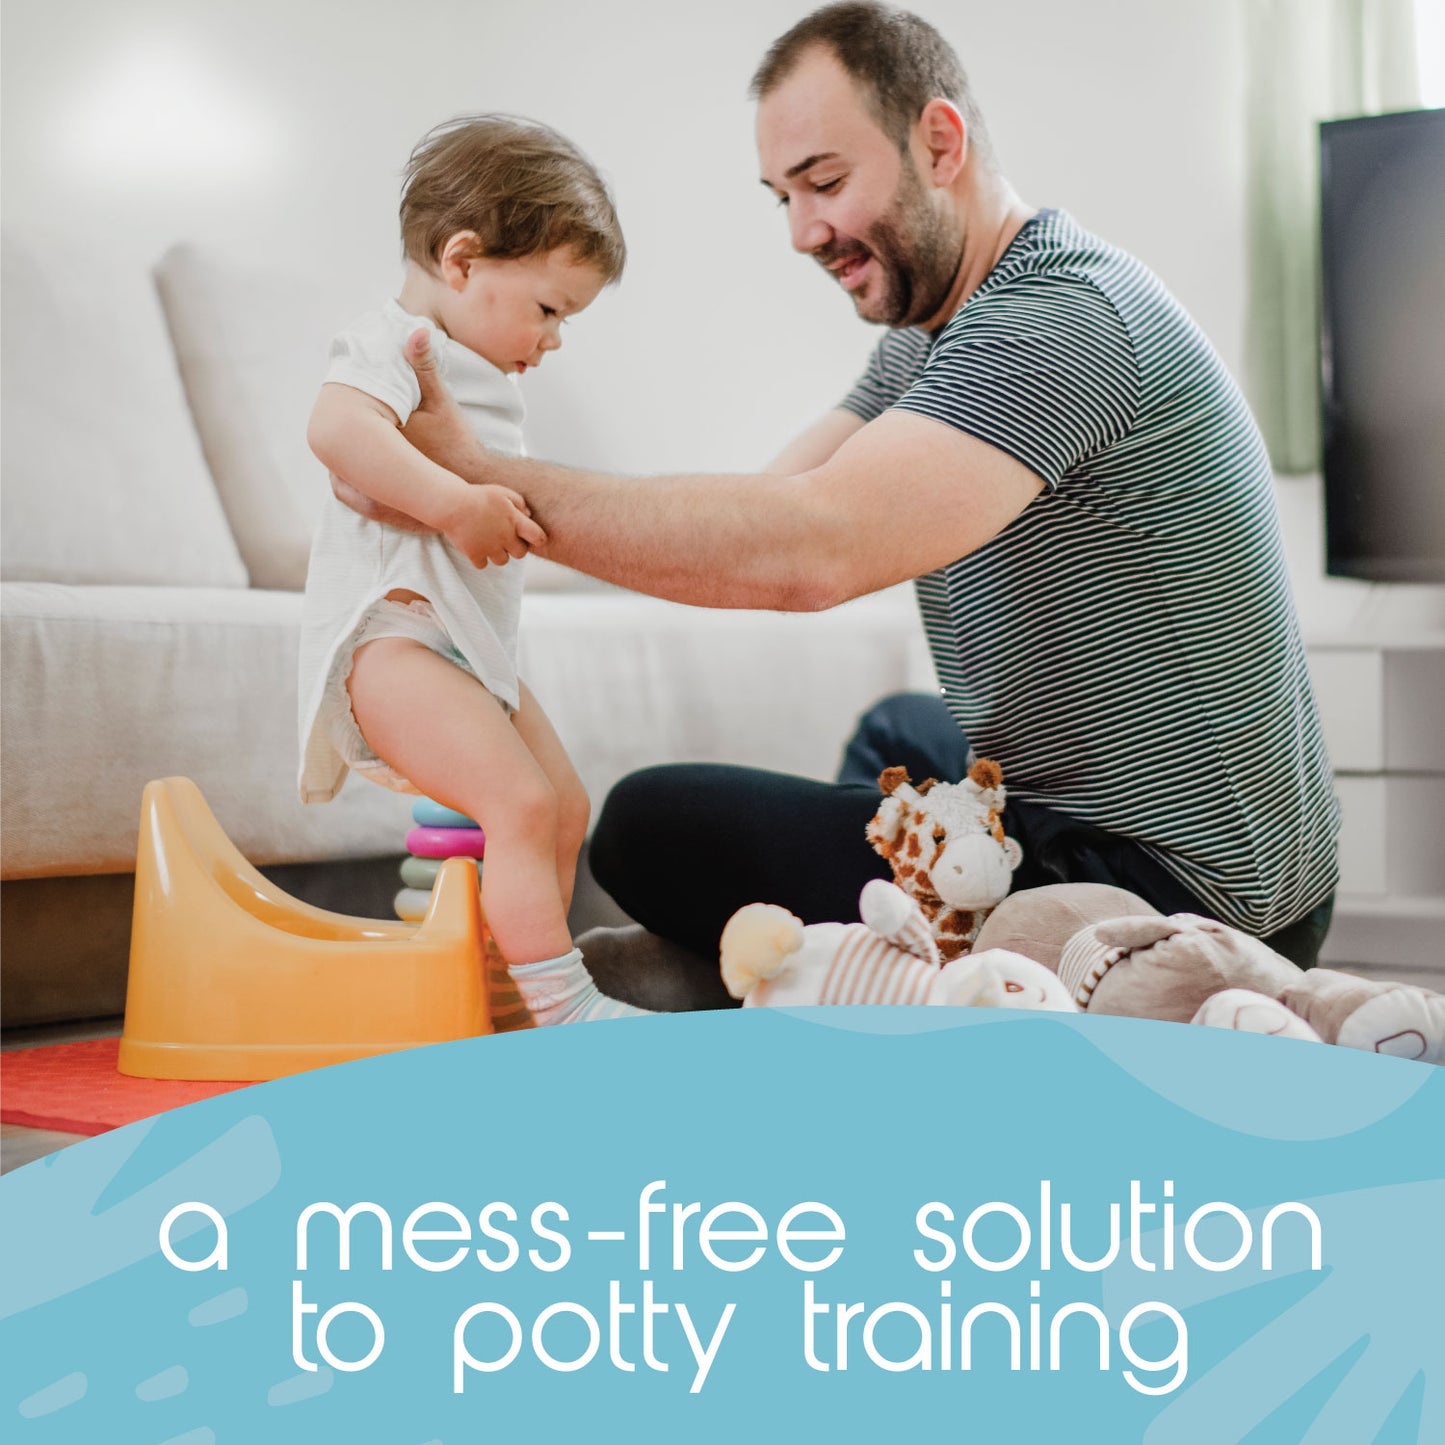 TidyTots Disposable Potty Chair Liners - Value Pack